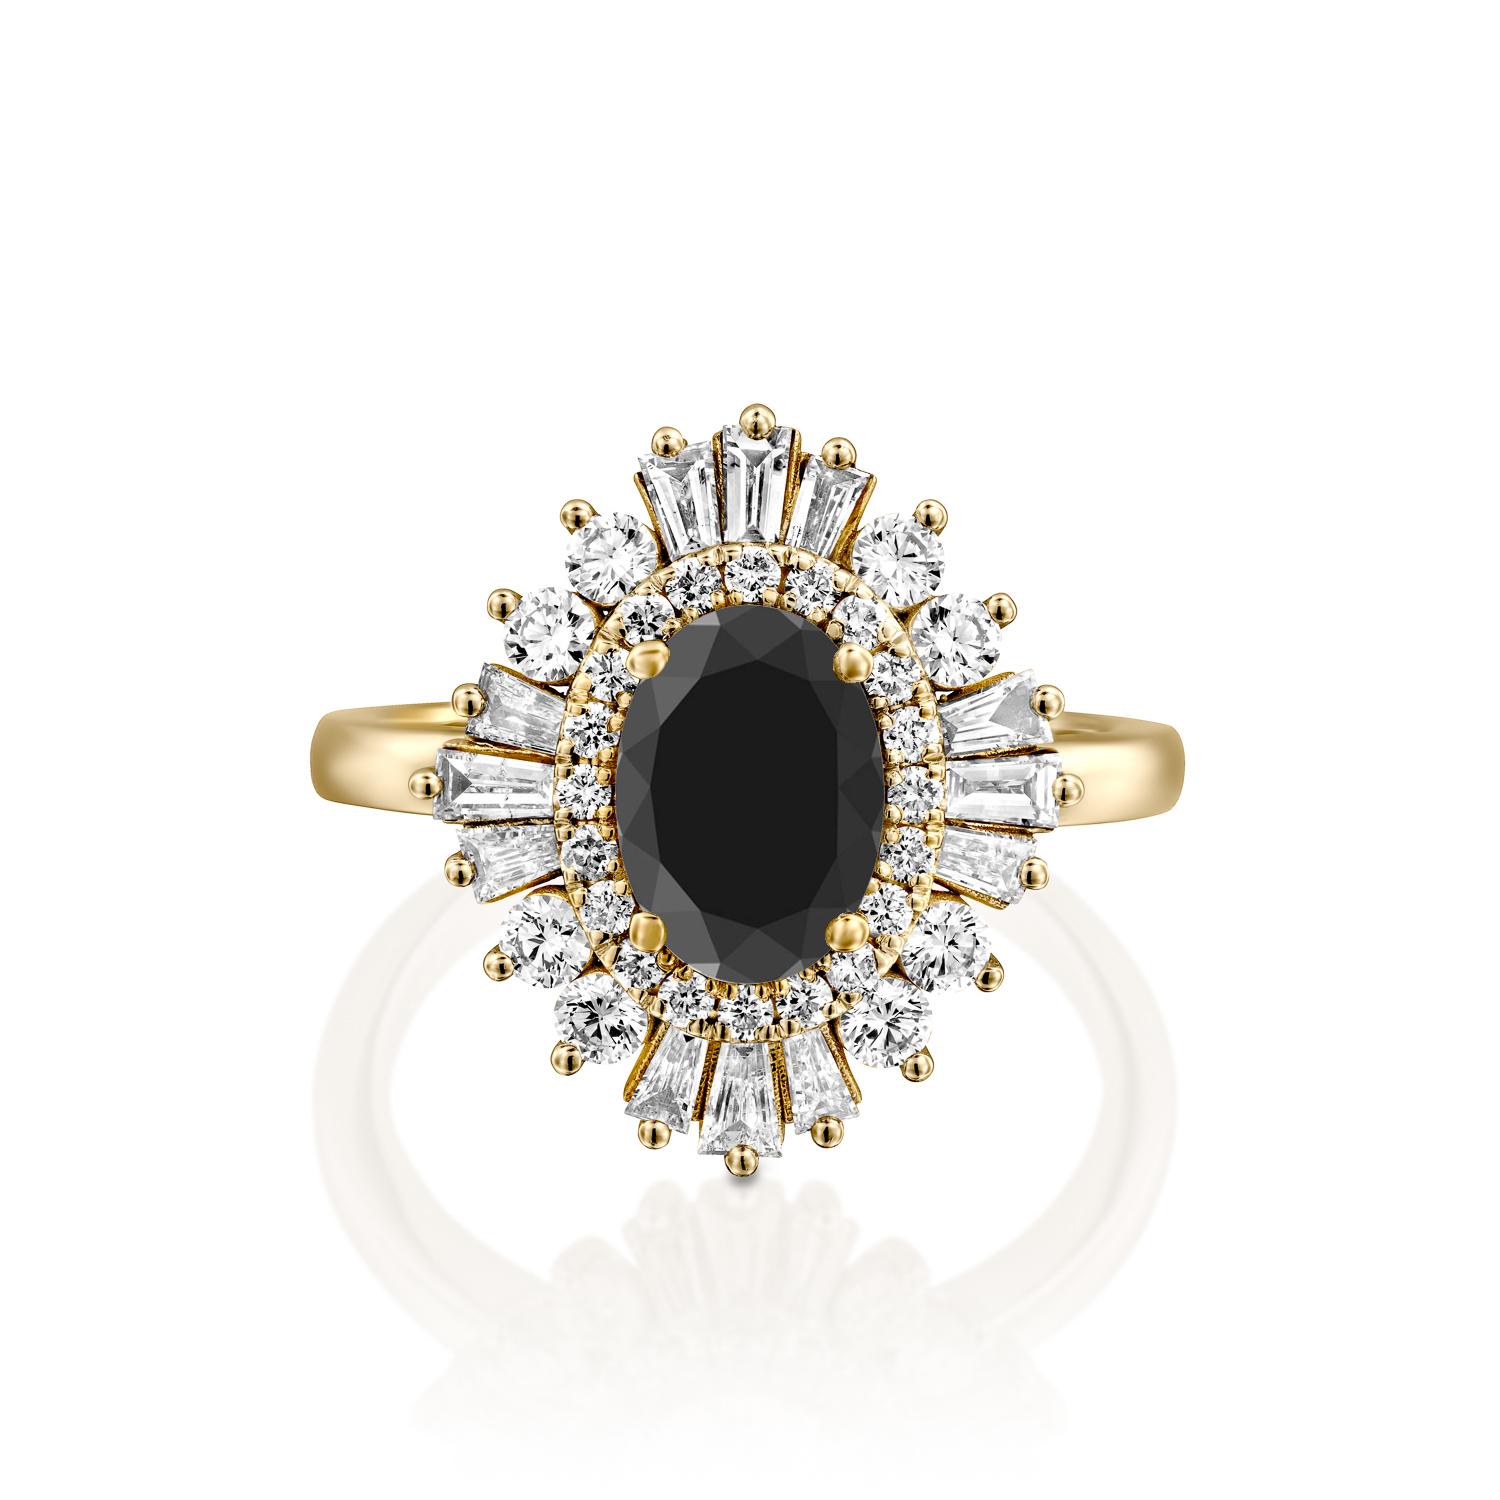 Beautiful solitaire with accents Victorian style diamond engagement ring. Center stone is natural, round shaped, AAA quality Black Diamond of 3/4 carat and it is surrounded by smaller natural diamonds approx. 1 total carat weight. The total carat